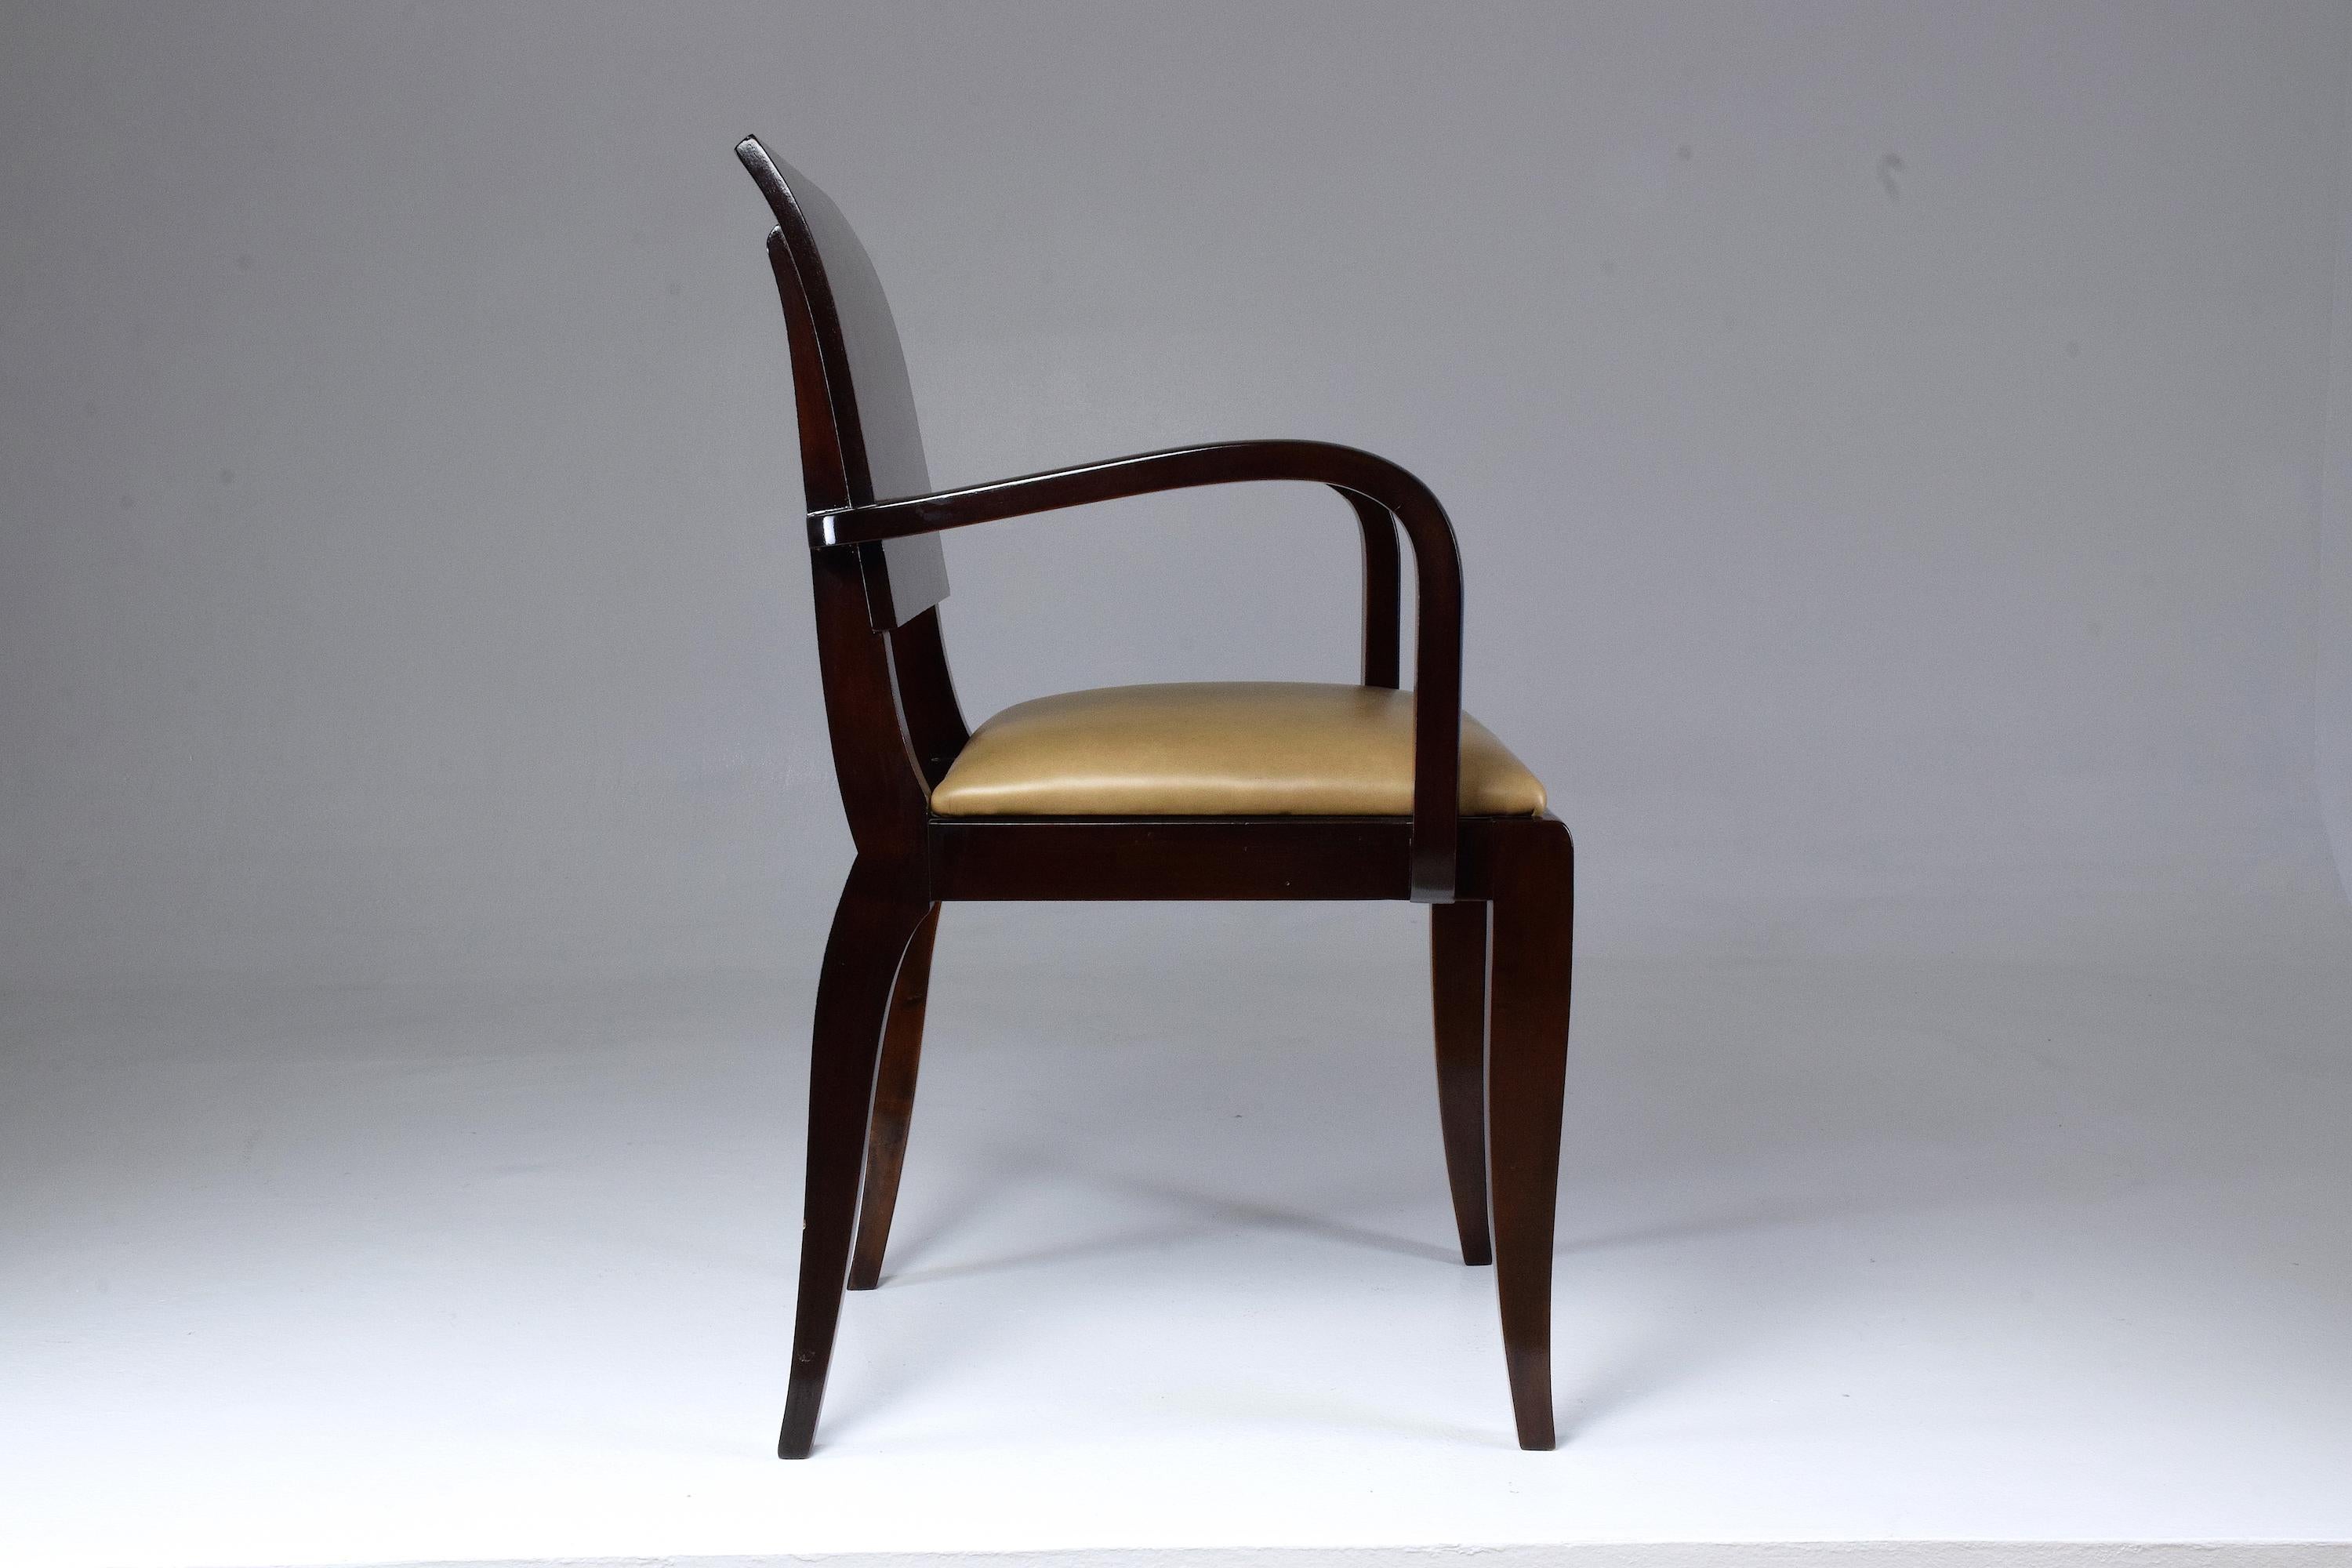 20th-century vintage French armchair or office chair in restored condition composed of curved armrests and a leather seat in Art Deco style.
France, circa 1940s.